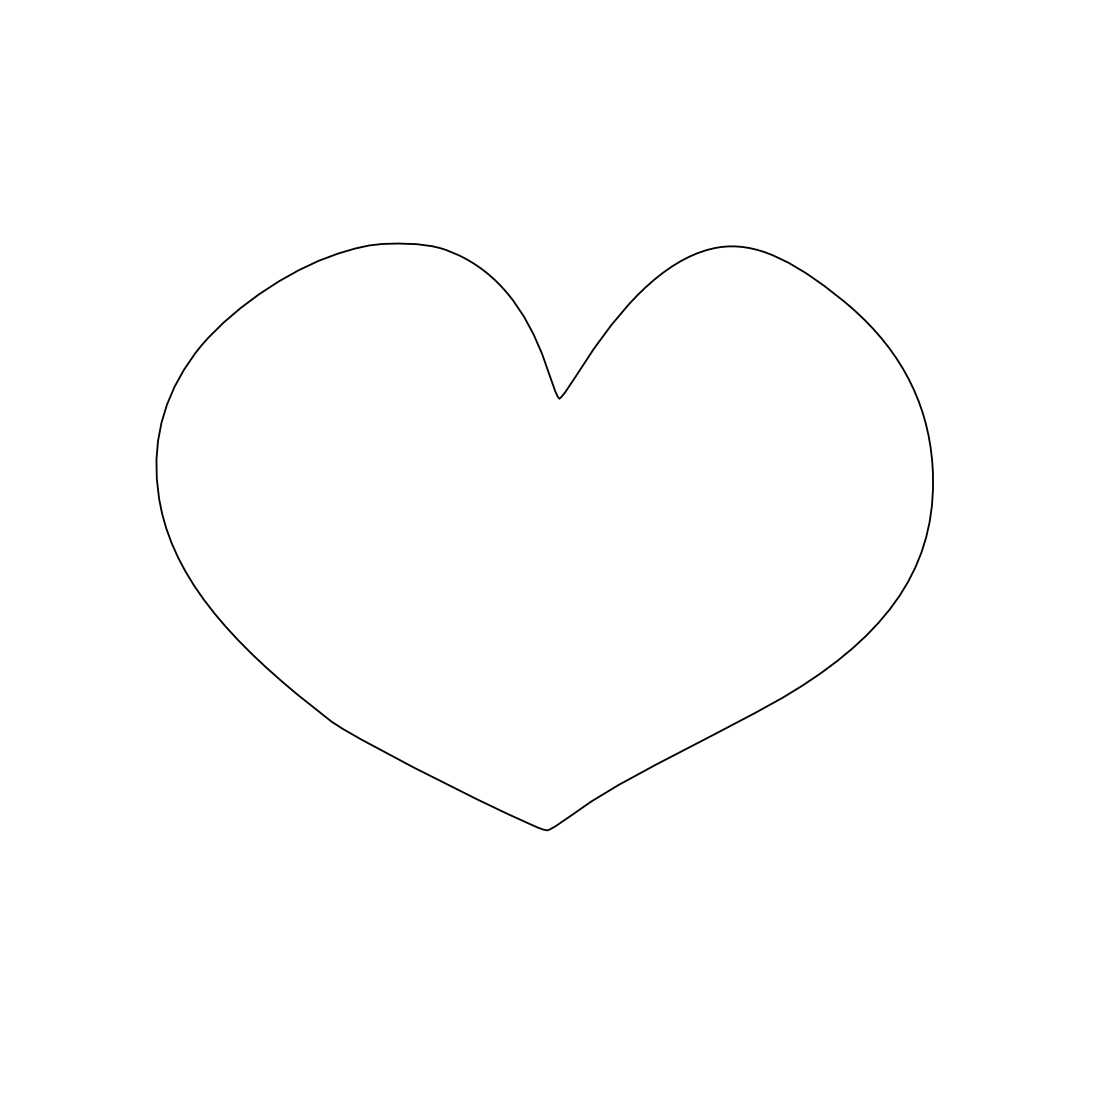 Heart  black and white heart clipart black and white heart 4 5